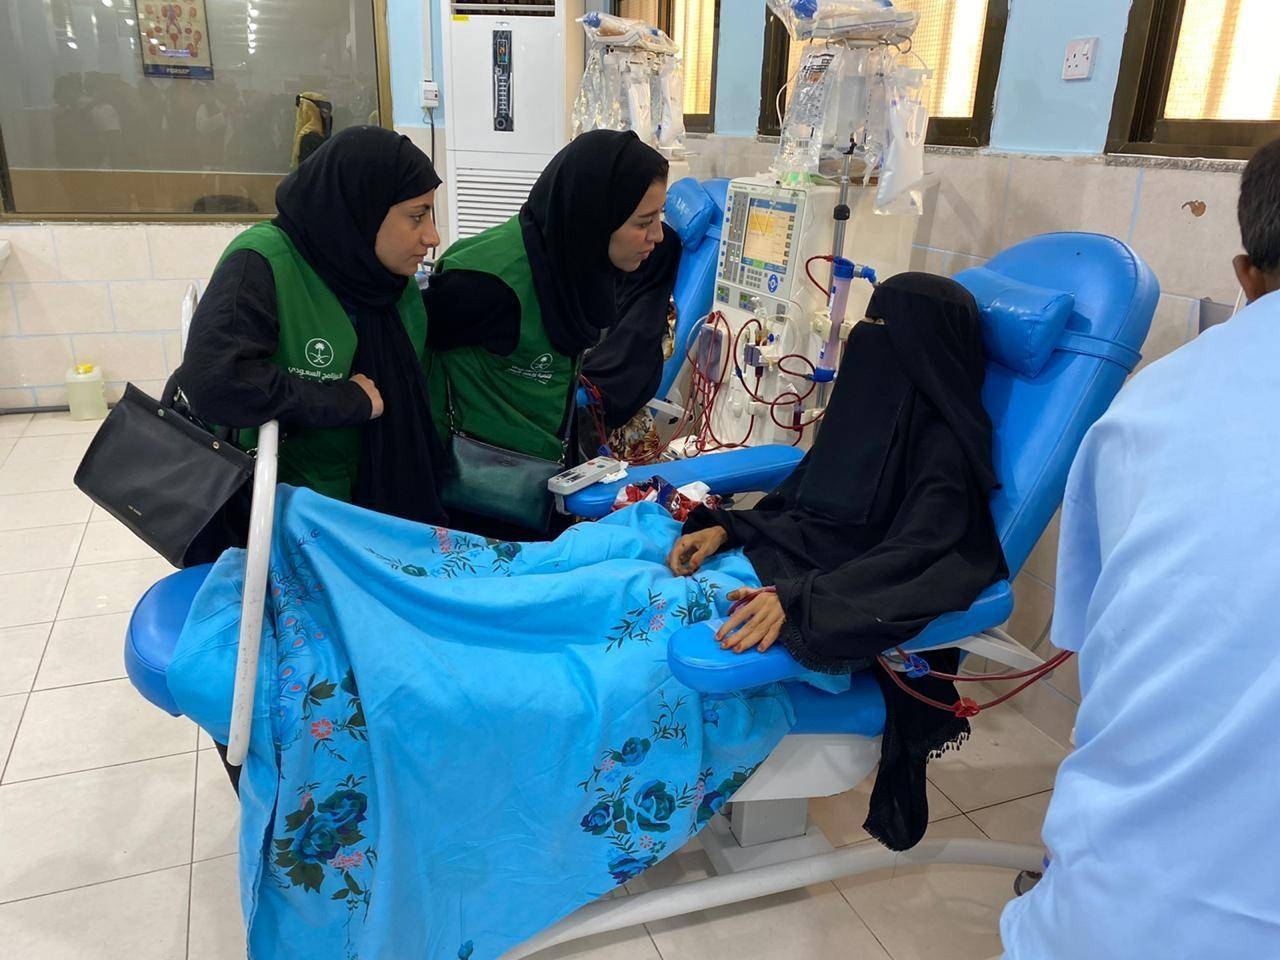 Representatives of the Saudi Development and Reconstruction Program for Yemen (SDRPY) visiting a patient in Aden General Hospital.